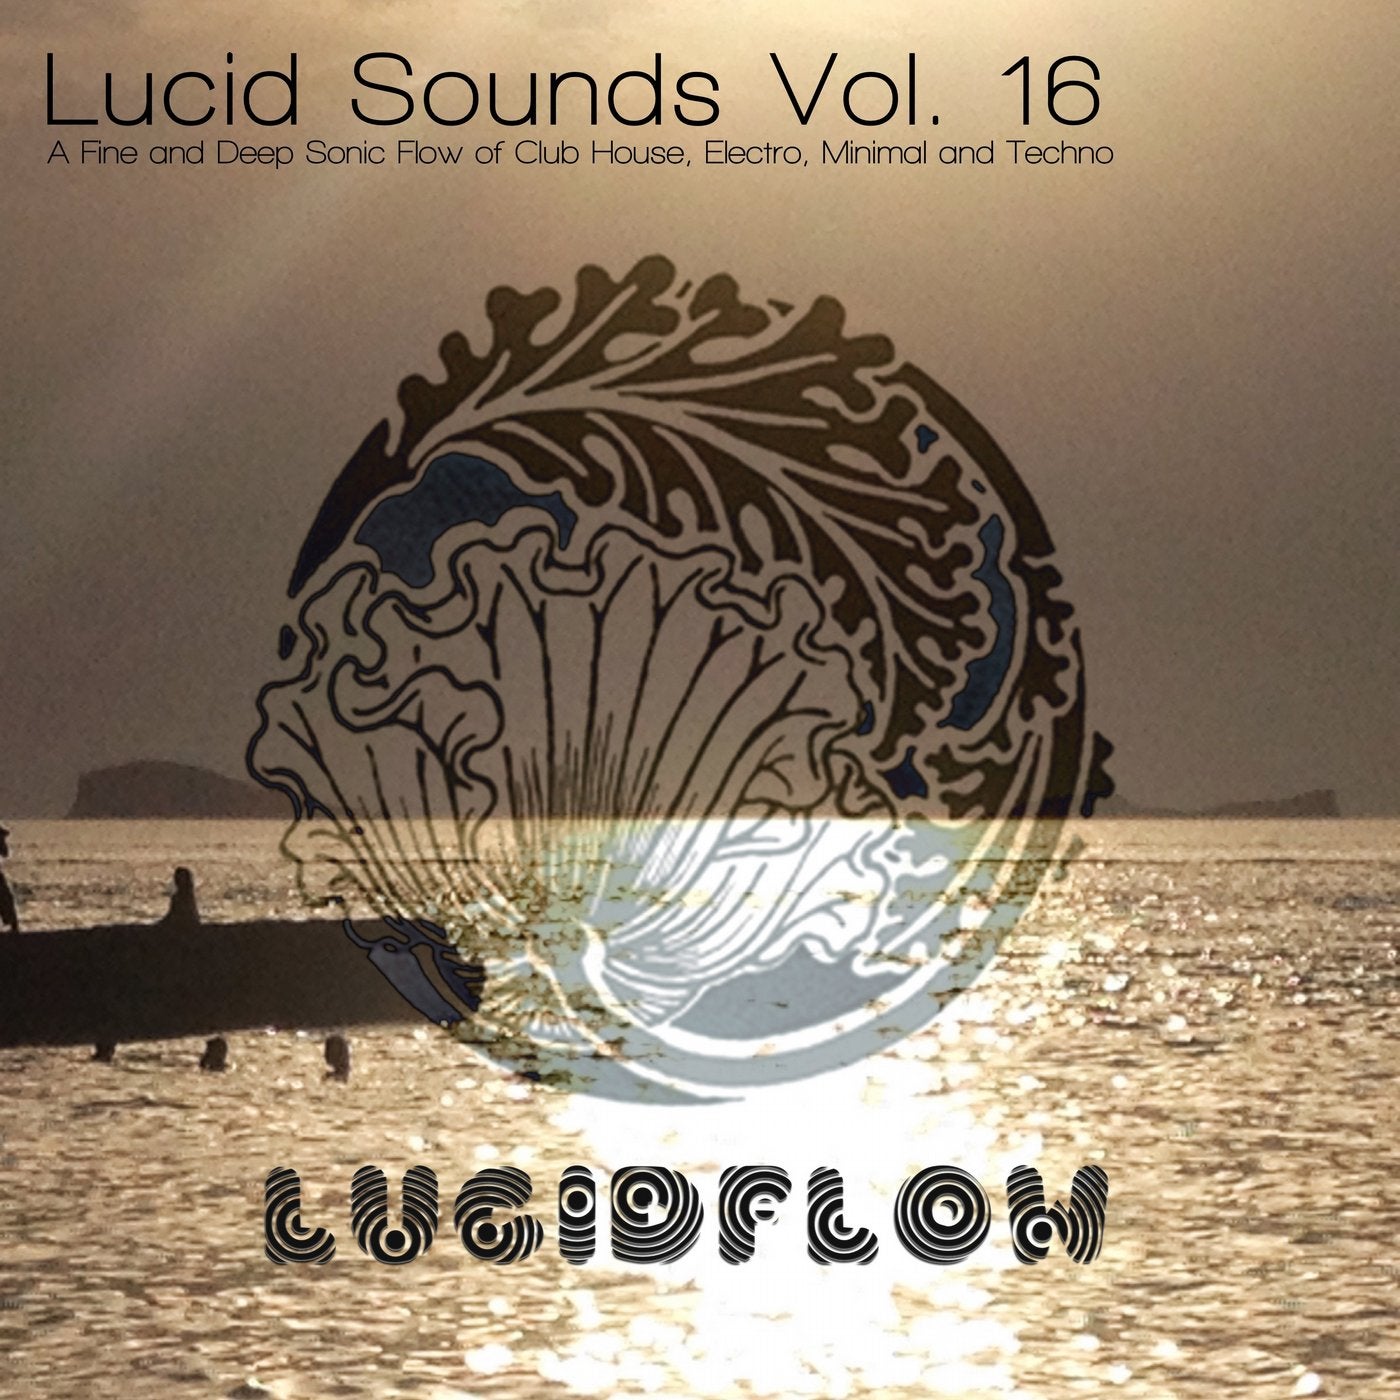 Lucid Sounds, Vol. 16 - A Fine and Deep Sonic Flow of Club House, Electro, Minimal and Techno